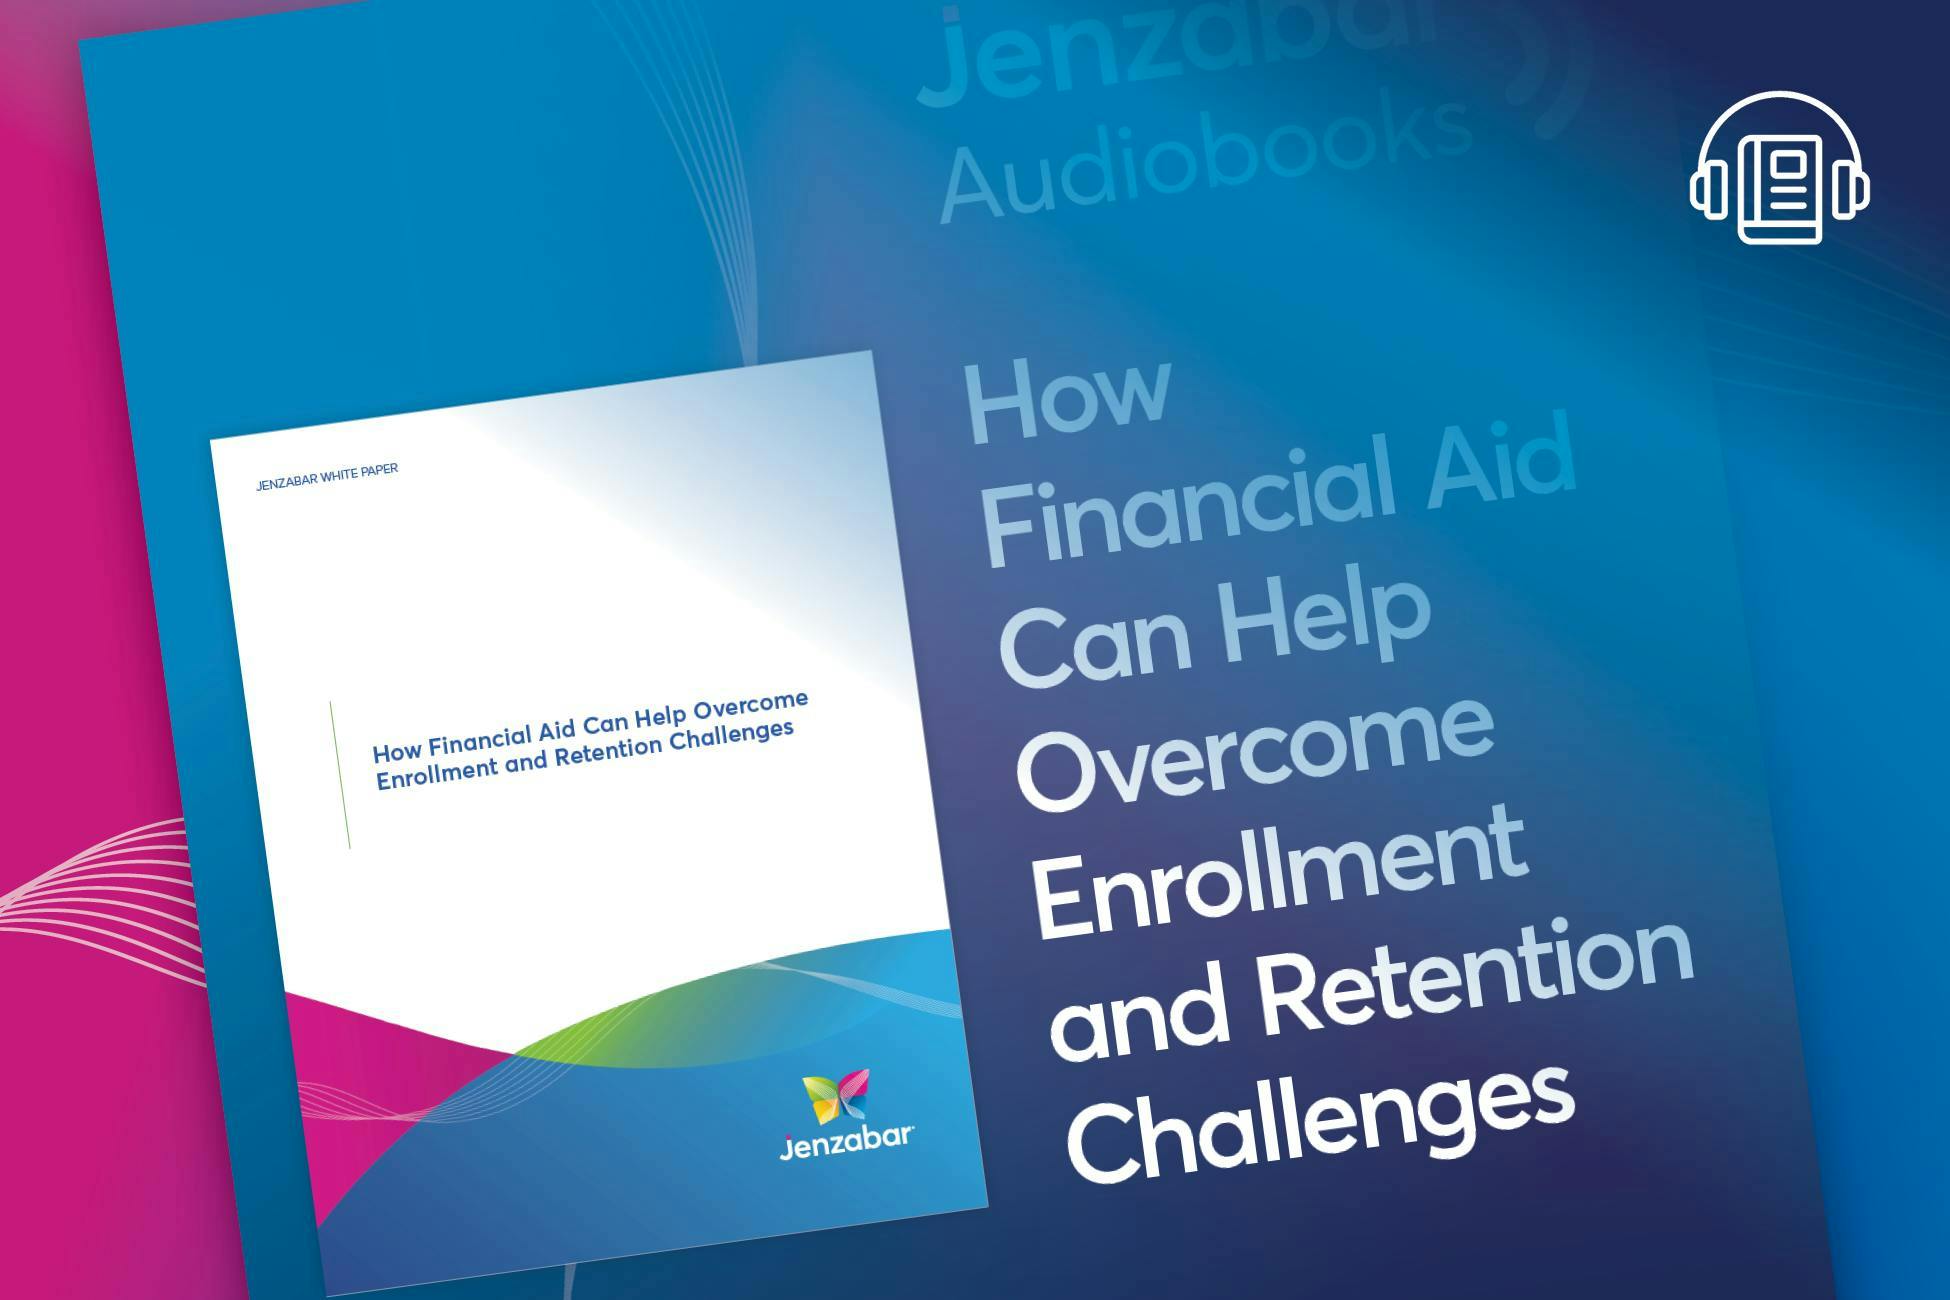 Audiobook: How Financial Aid Can Help Overcome Enrollment and Retention Challenges